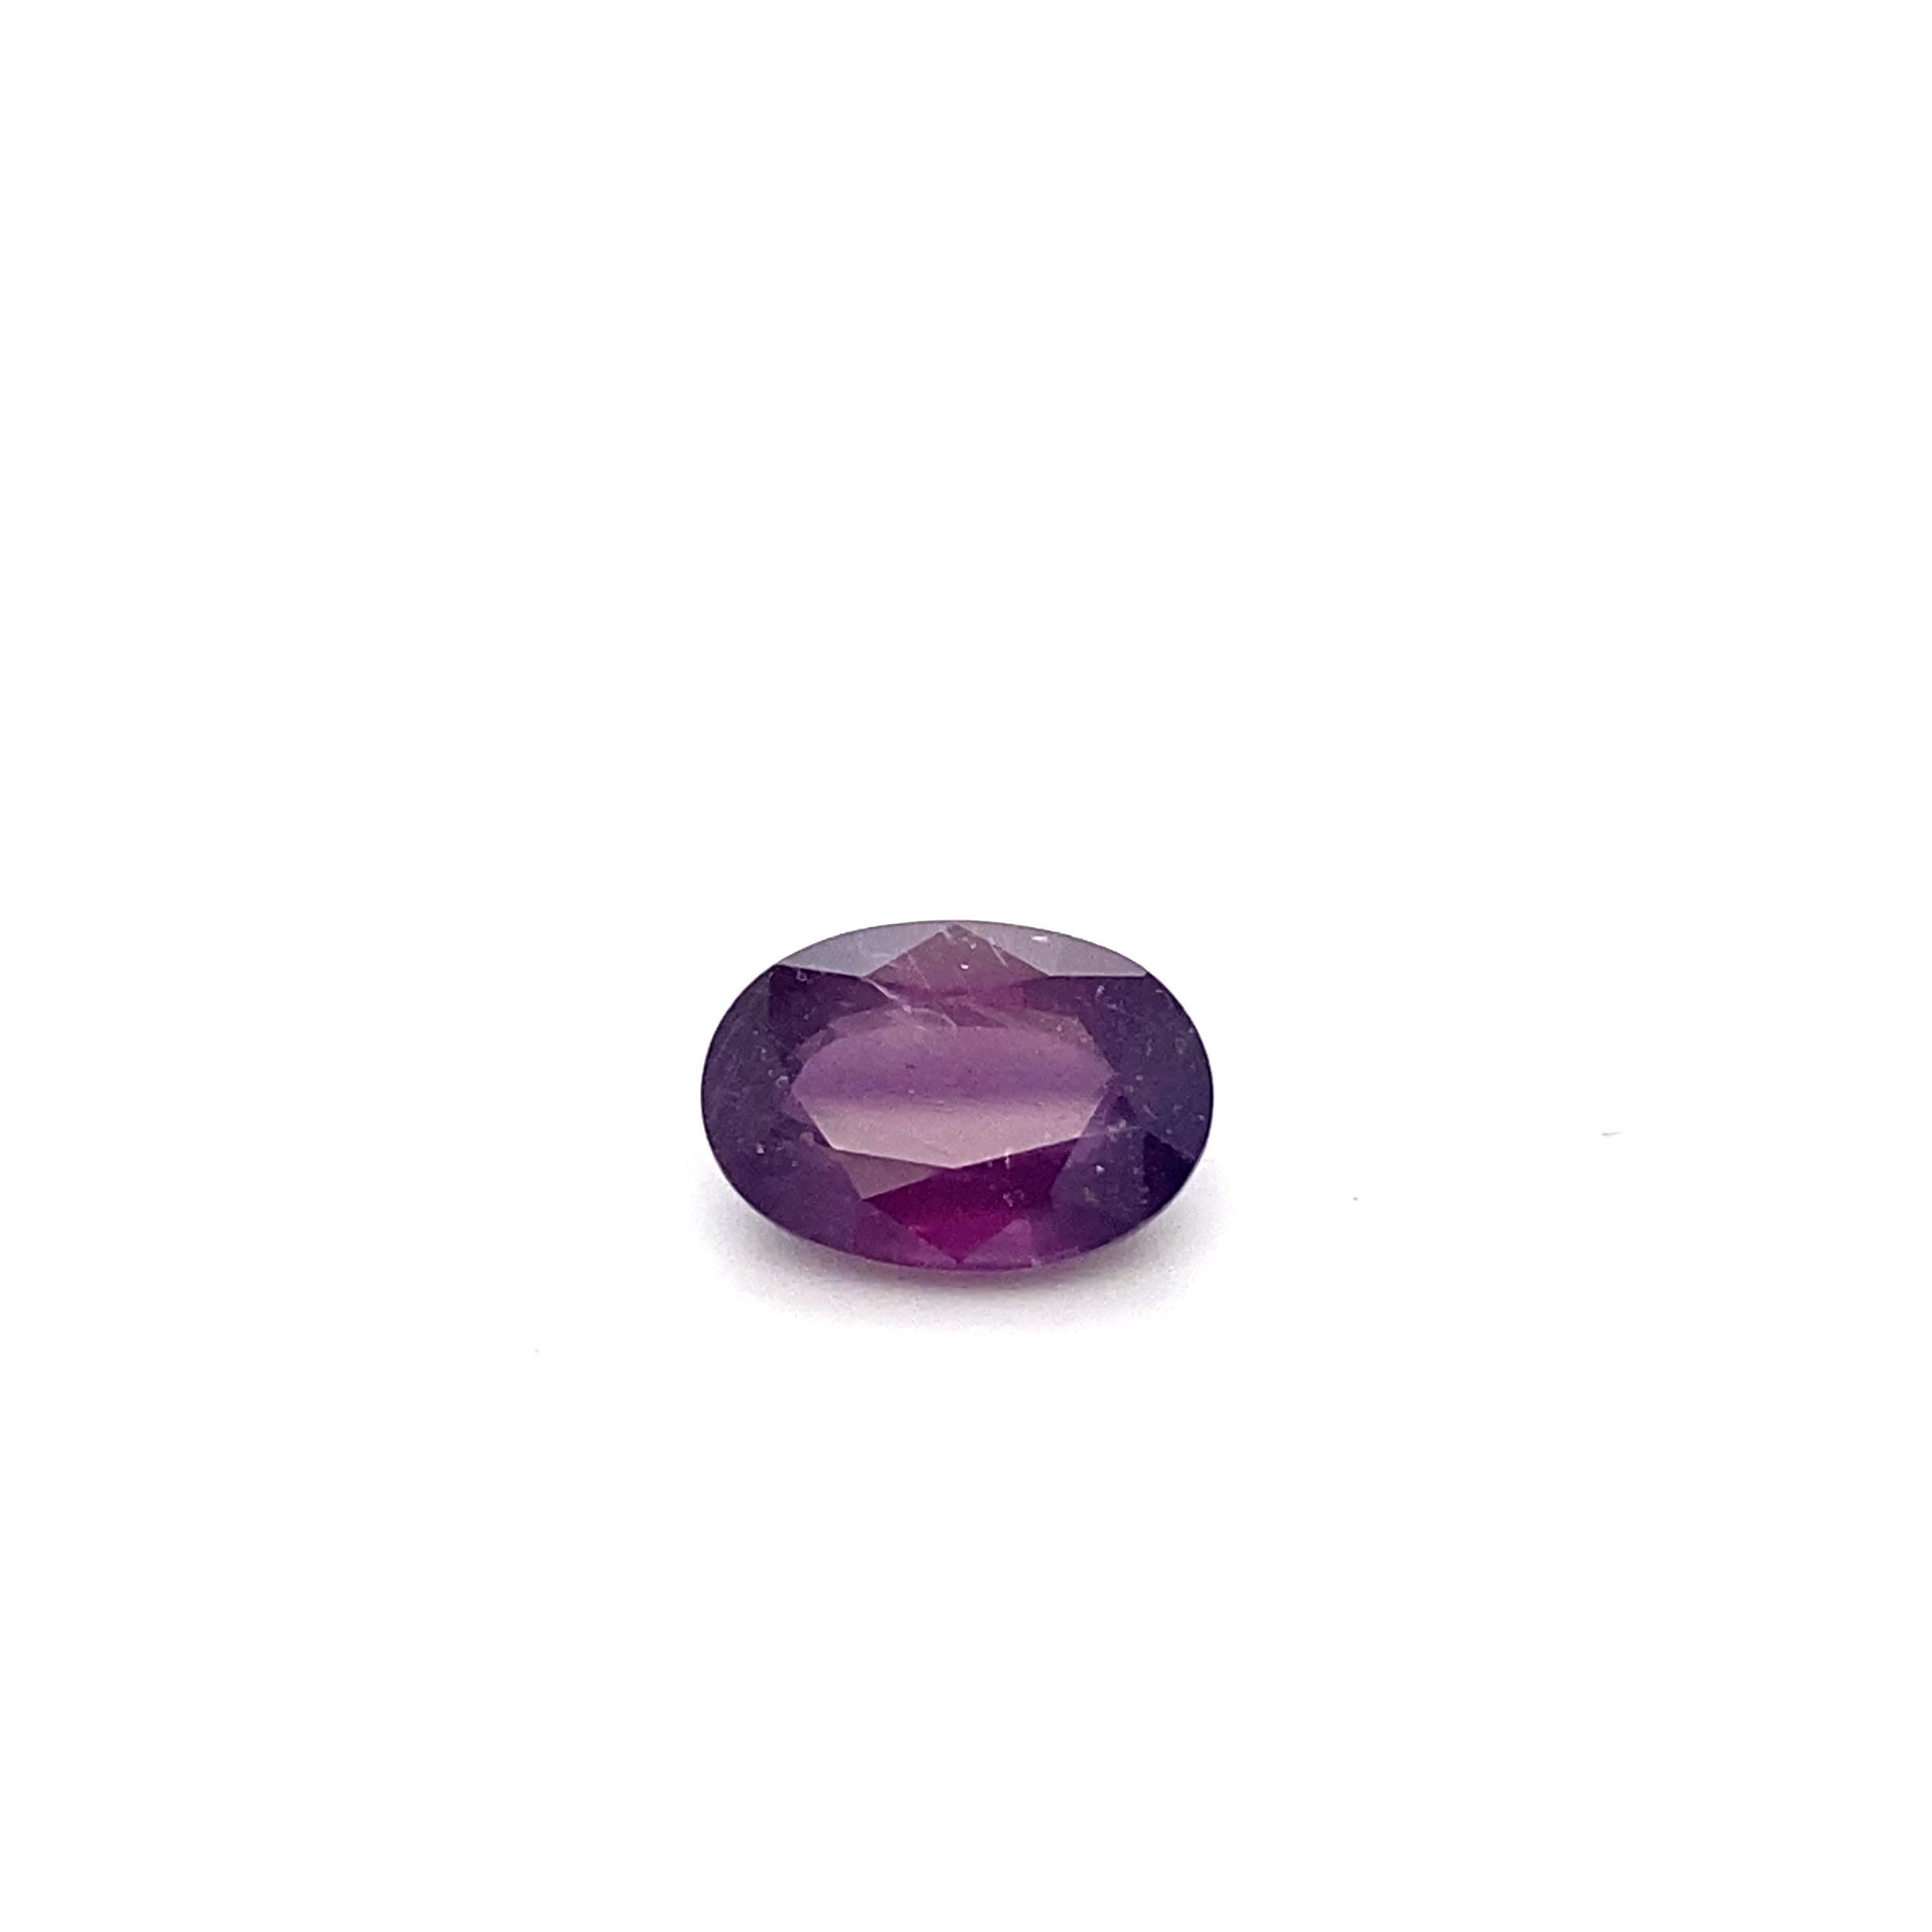 GIA certified 5.94 carat oval shape natural pink purple sapphire is a truly breathtaking loose gemstone. Originated in East Africa and NO HEAT makes it a highly desirable piece. It is hand cut in step cut style and hand polished by skilled